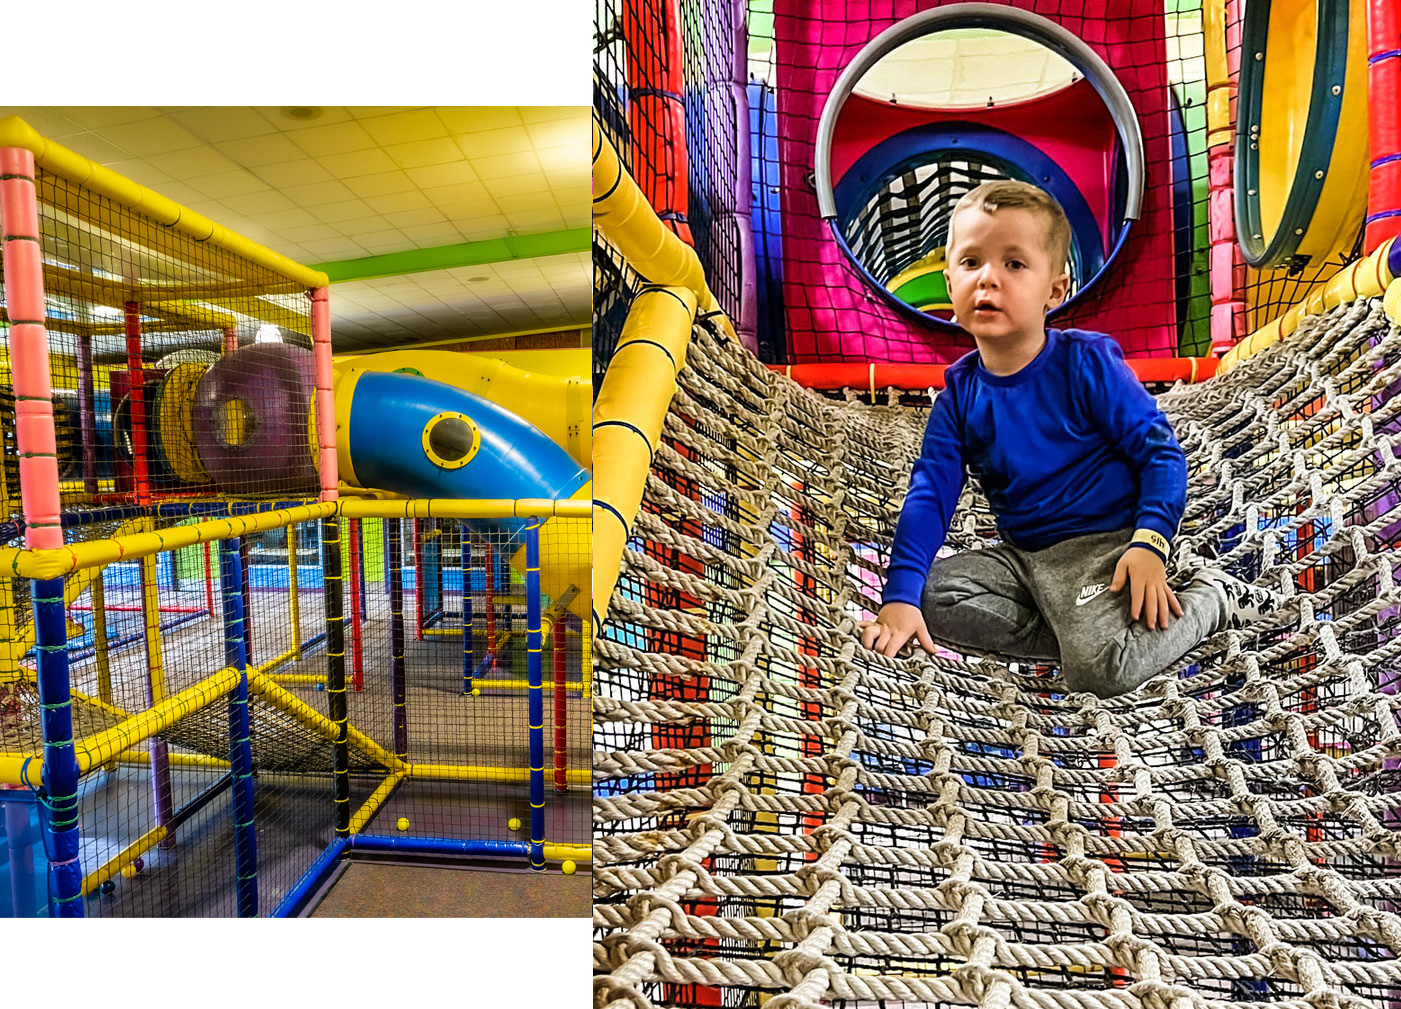 Slinky Action Zone Soft Play Area